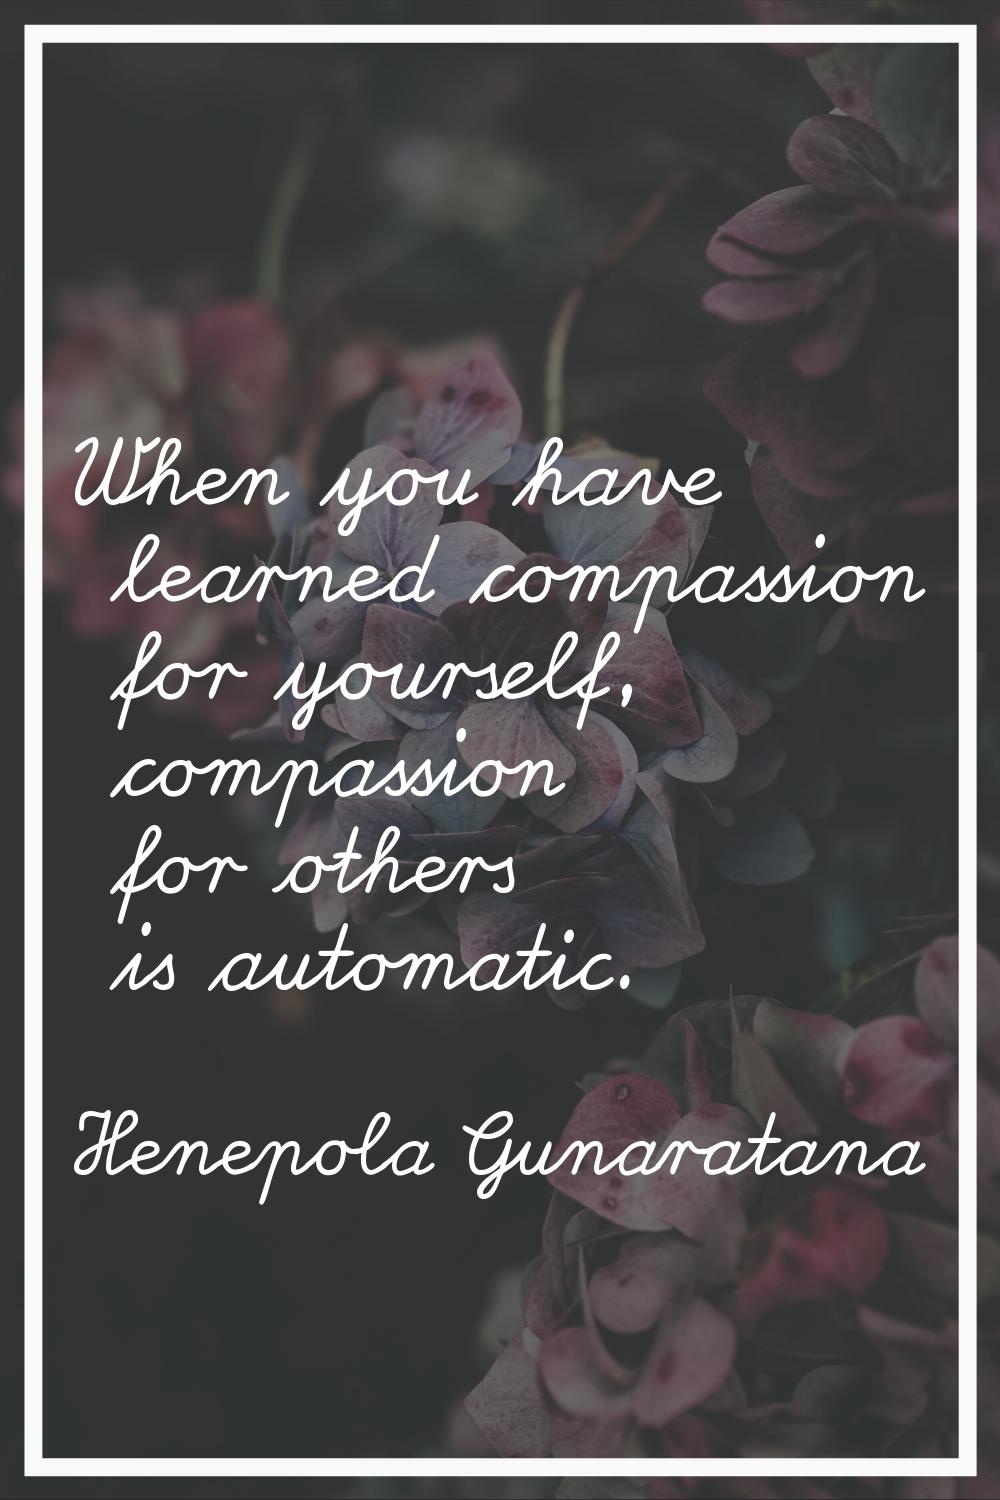 When you have learned compassion for yourself, compassion for others is automatic.